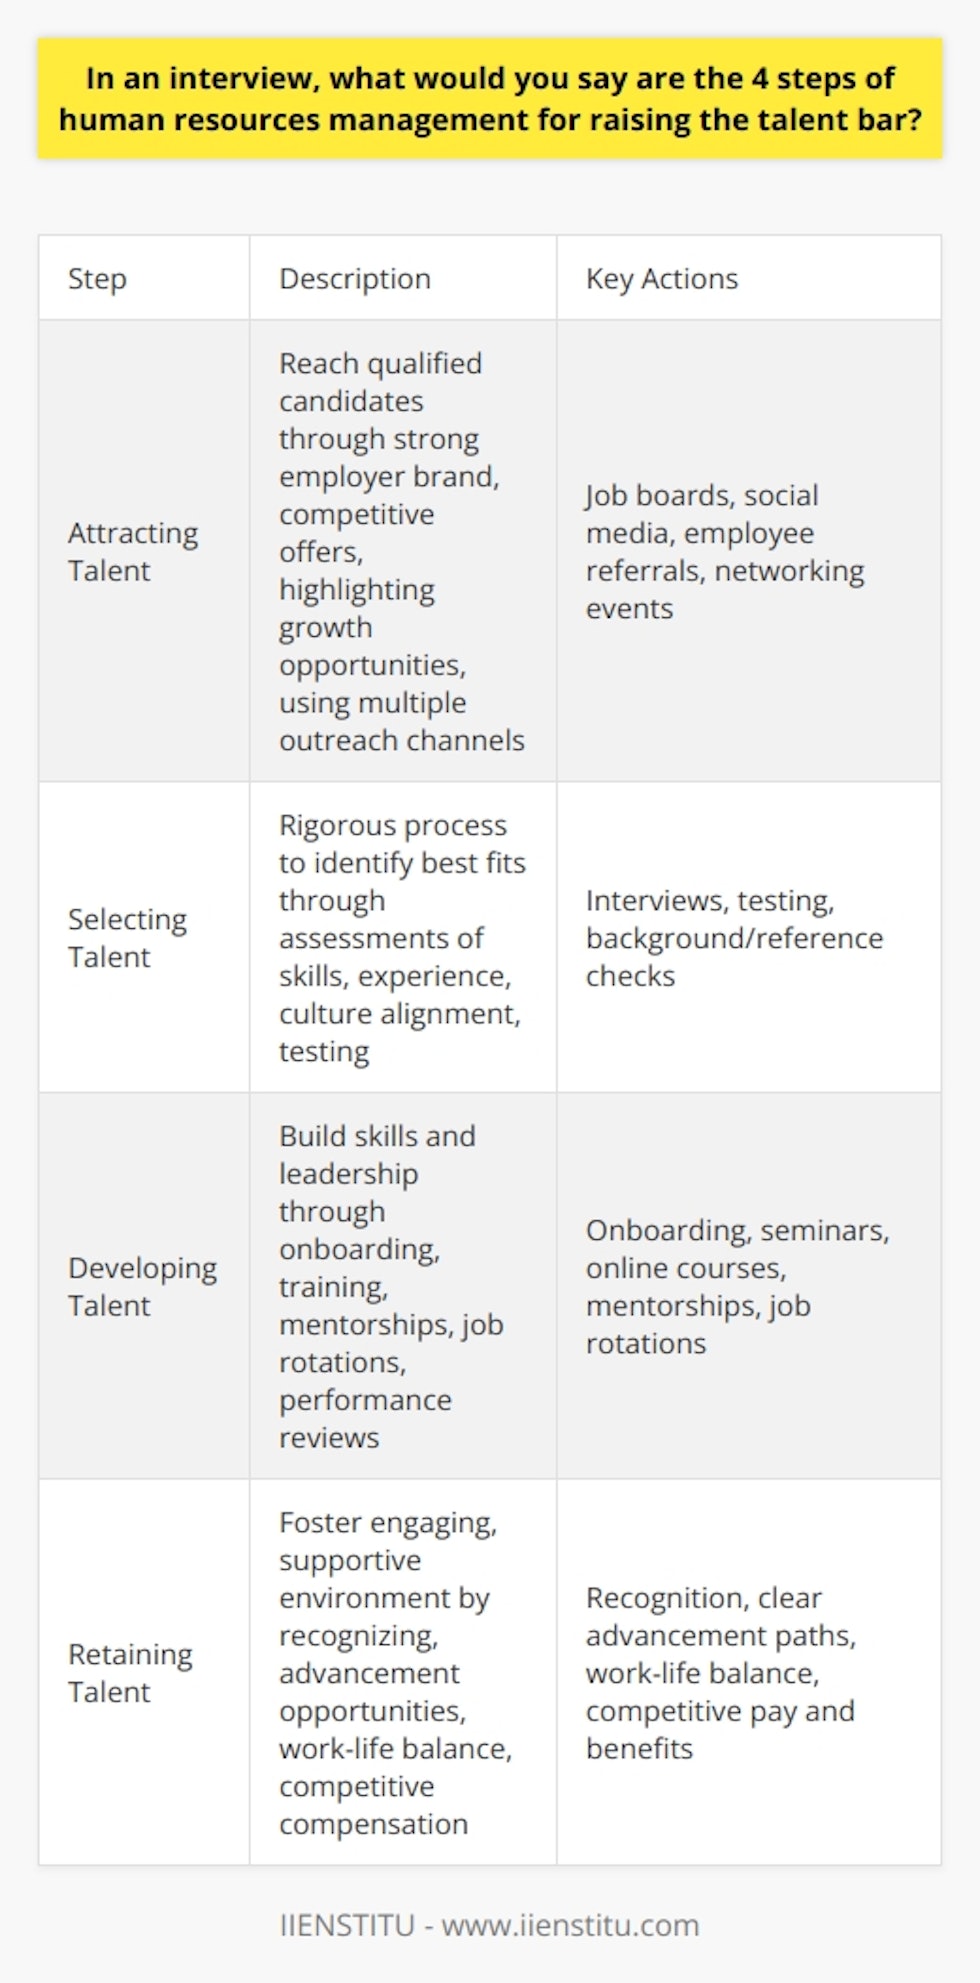 Here is a detailed content on the 4 steps of human resources management for raising the talent bar:Attracting TalentThe first step in raising the talent bar is to attract qualified, skilled candidates to apply for open positions. This requires having a strong employer brand and reputation, offering competitive compensation and benefits, highlighting development and growth opportunities, and reaching potential applicants through multiple channels like job boards, social media, employee referrals, and networking events. The goal is casting a wide net to connect with passive and active job seekers who meet the qualifications and have the potential to thrive.Selecting Talent  Once you have a pool of applicants, the next step is having a rigorous selection process to identify the very best people. This requires conducting structured interviews that assess skills, experience, and fit. It also involves administering any necessary testing, background checks, and reference checks. The selection stage is key for figuring out which applicants not only meet the basic criteria but also align with the company culture and show the aptitude and attitude to grow into higher roles.Developing TalentAfter acquiring talent, there must be a focus on developing skills and leadership capabilities. This includes onboarding programs, mentorships, training seminars, online courses, job rotations, and frequent performance reviews. Developing talent takes a long-term view so employees are constantly improving and taking on new responsibilities. This makes them more engaged, qualified for promotions, and prepared to replace senior leaders over time.Retaining TalentThe final step is to retain the strongest talent by fostering an engaging, supportive work environment. This means recognizing achievements, offering clear advancement paths, providing work-life balance, and keeping compensation and benefits competitive. When employees feel happy, challenged, and valued, they are far more likely to stay. High retention keeps talent from walking out the door and prevents the loss of institutional knowledge.In summary, attracting, selecting, developing and retaining top-tier talent at all levels allows an organization to raise the talent bar across the board. This builds a high-quality workforce ready to take on critical roles now and in the future.